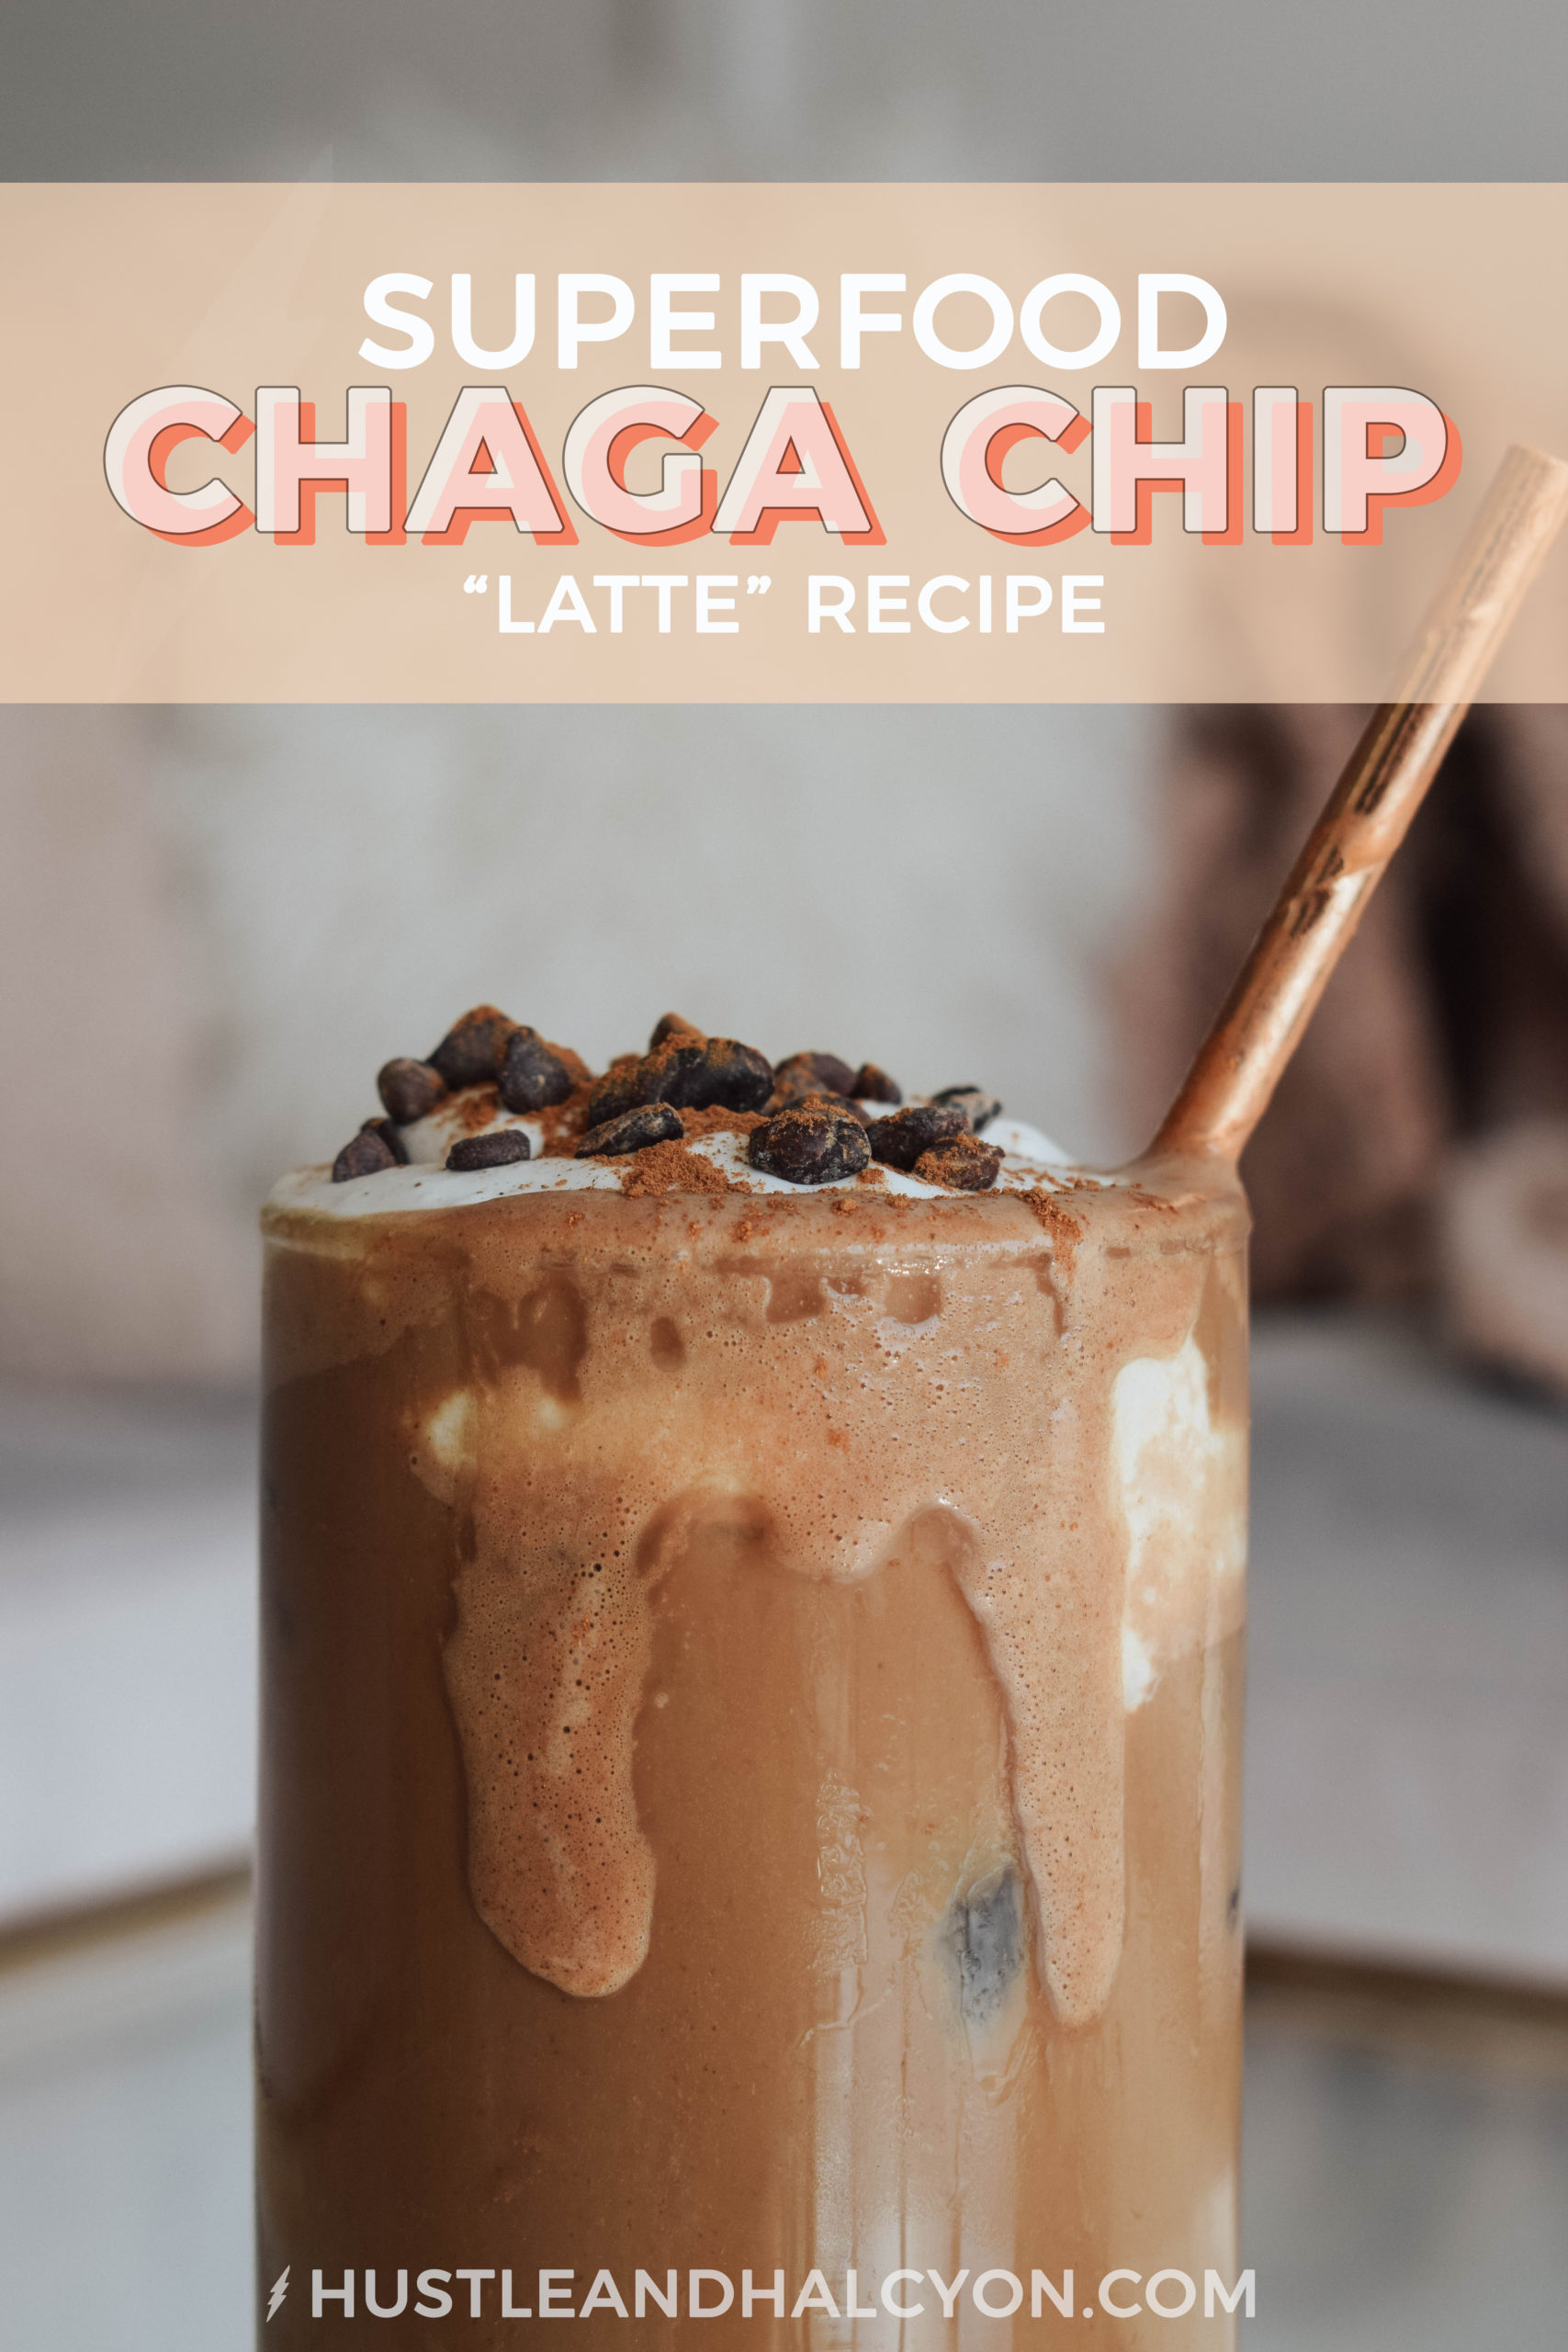 SUPERFOOD Chaga Chip Recipe by Hustle + Halcyon